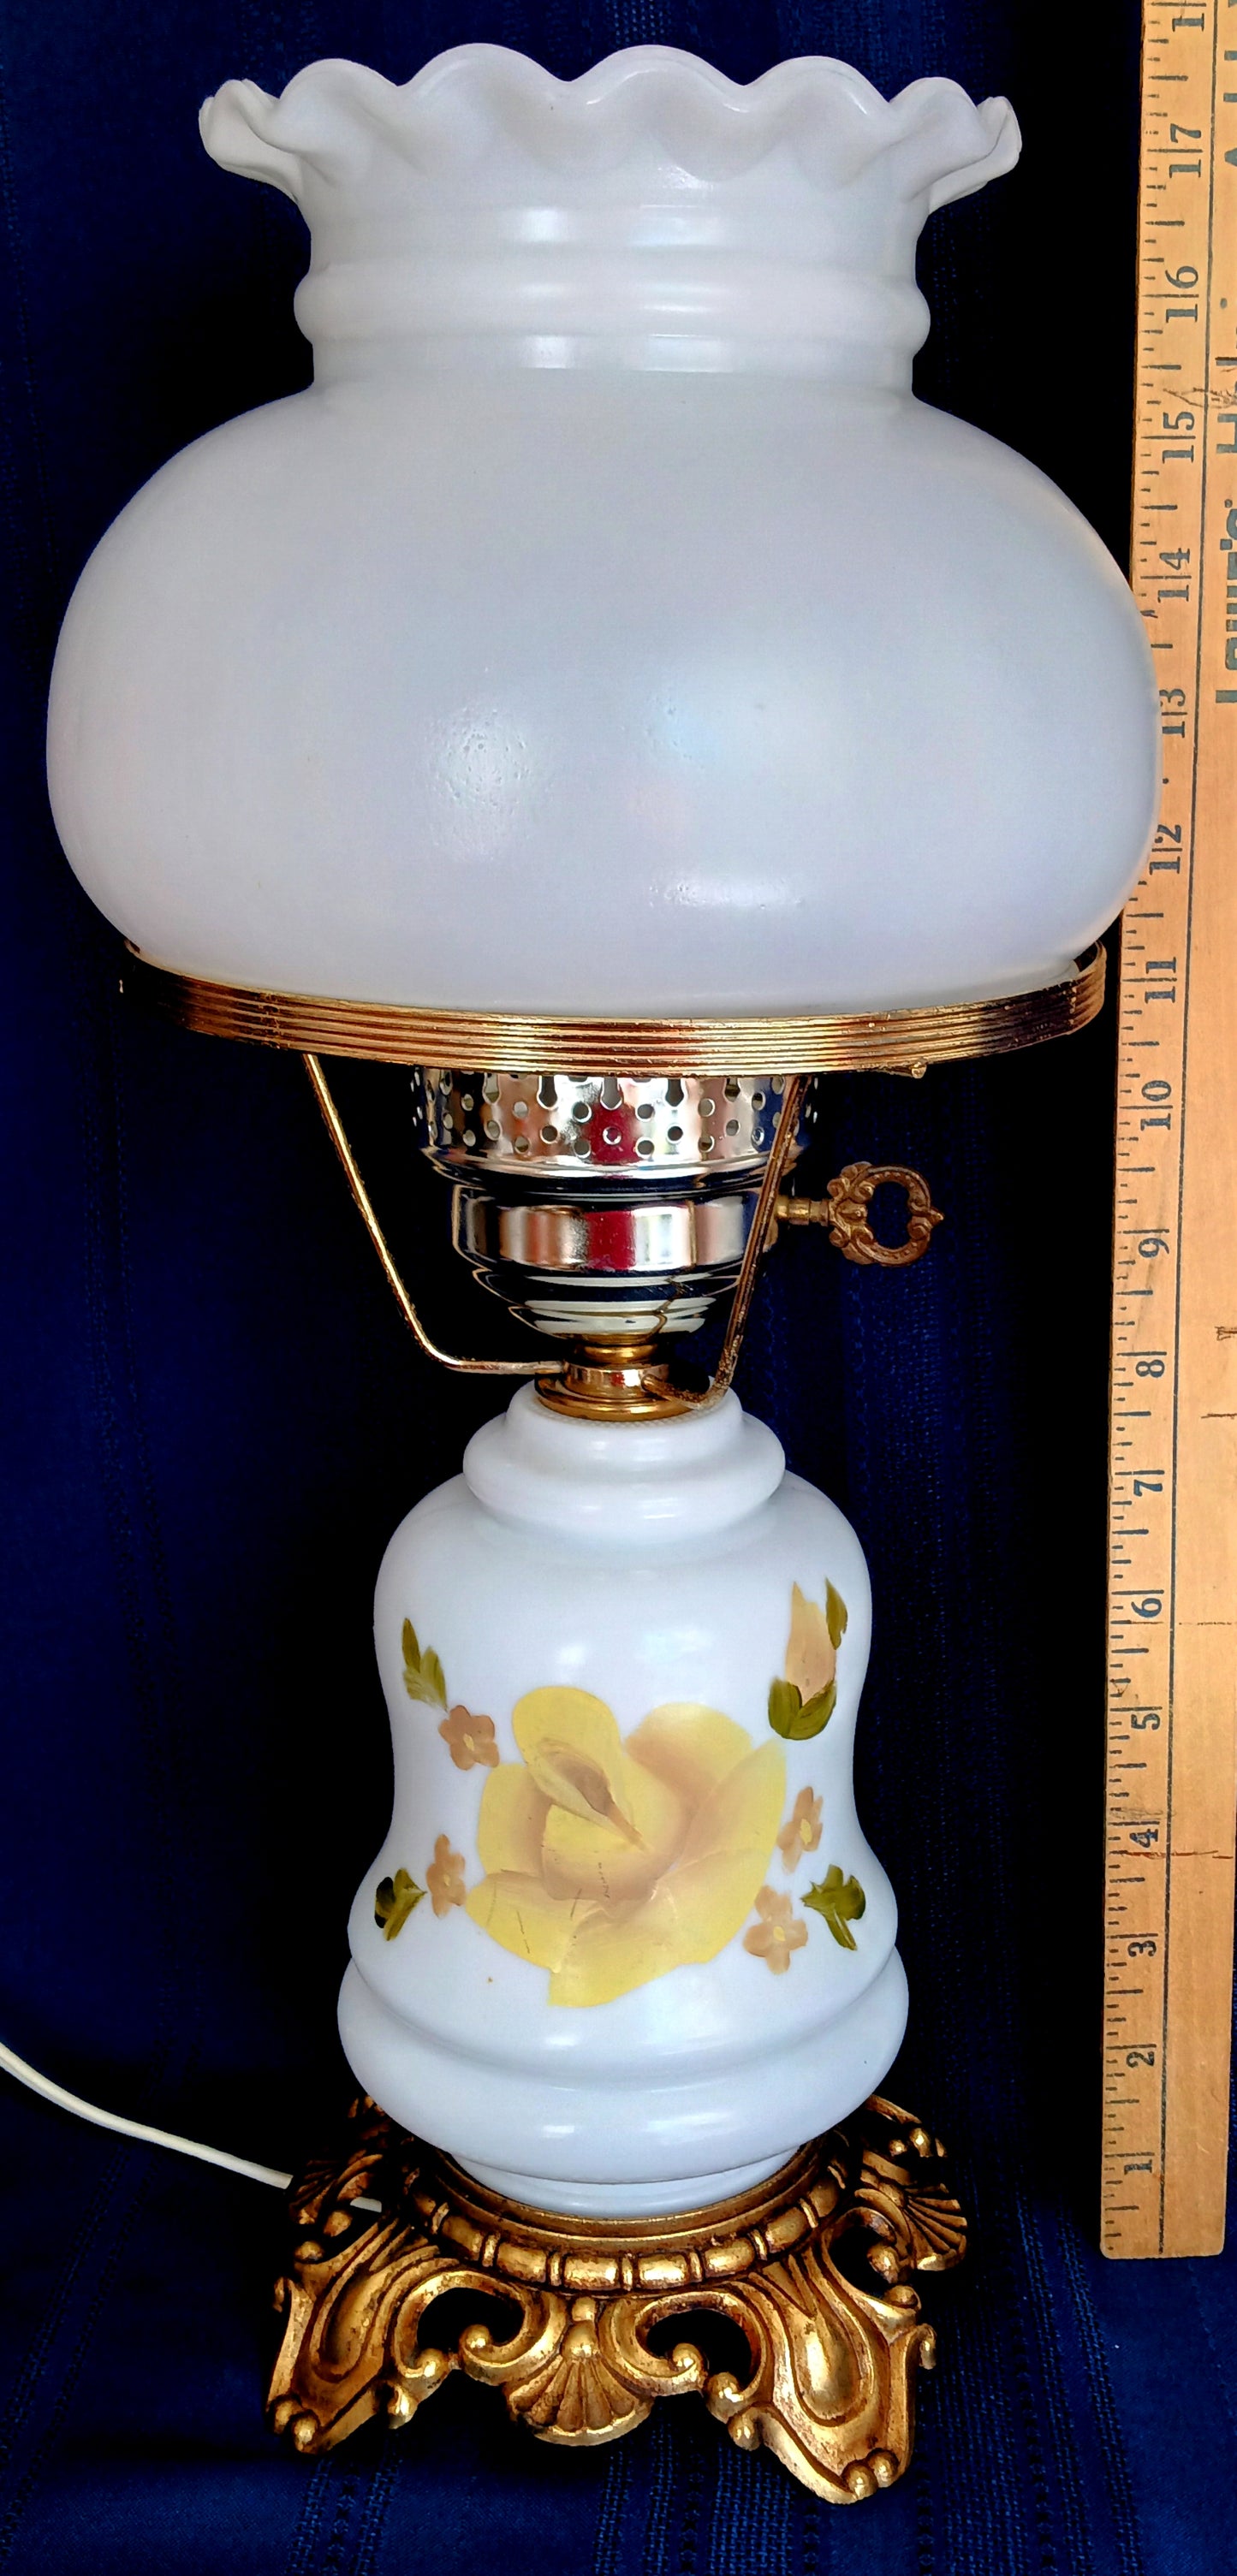 Vintage GWTW Style Milk Glass Table Lamp Painted Yellow Rose Ornate Solid Brass Base Shade w/Scalloped Edge Dresser Desk Parlor Vanity Lamp